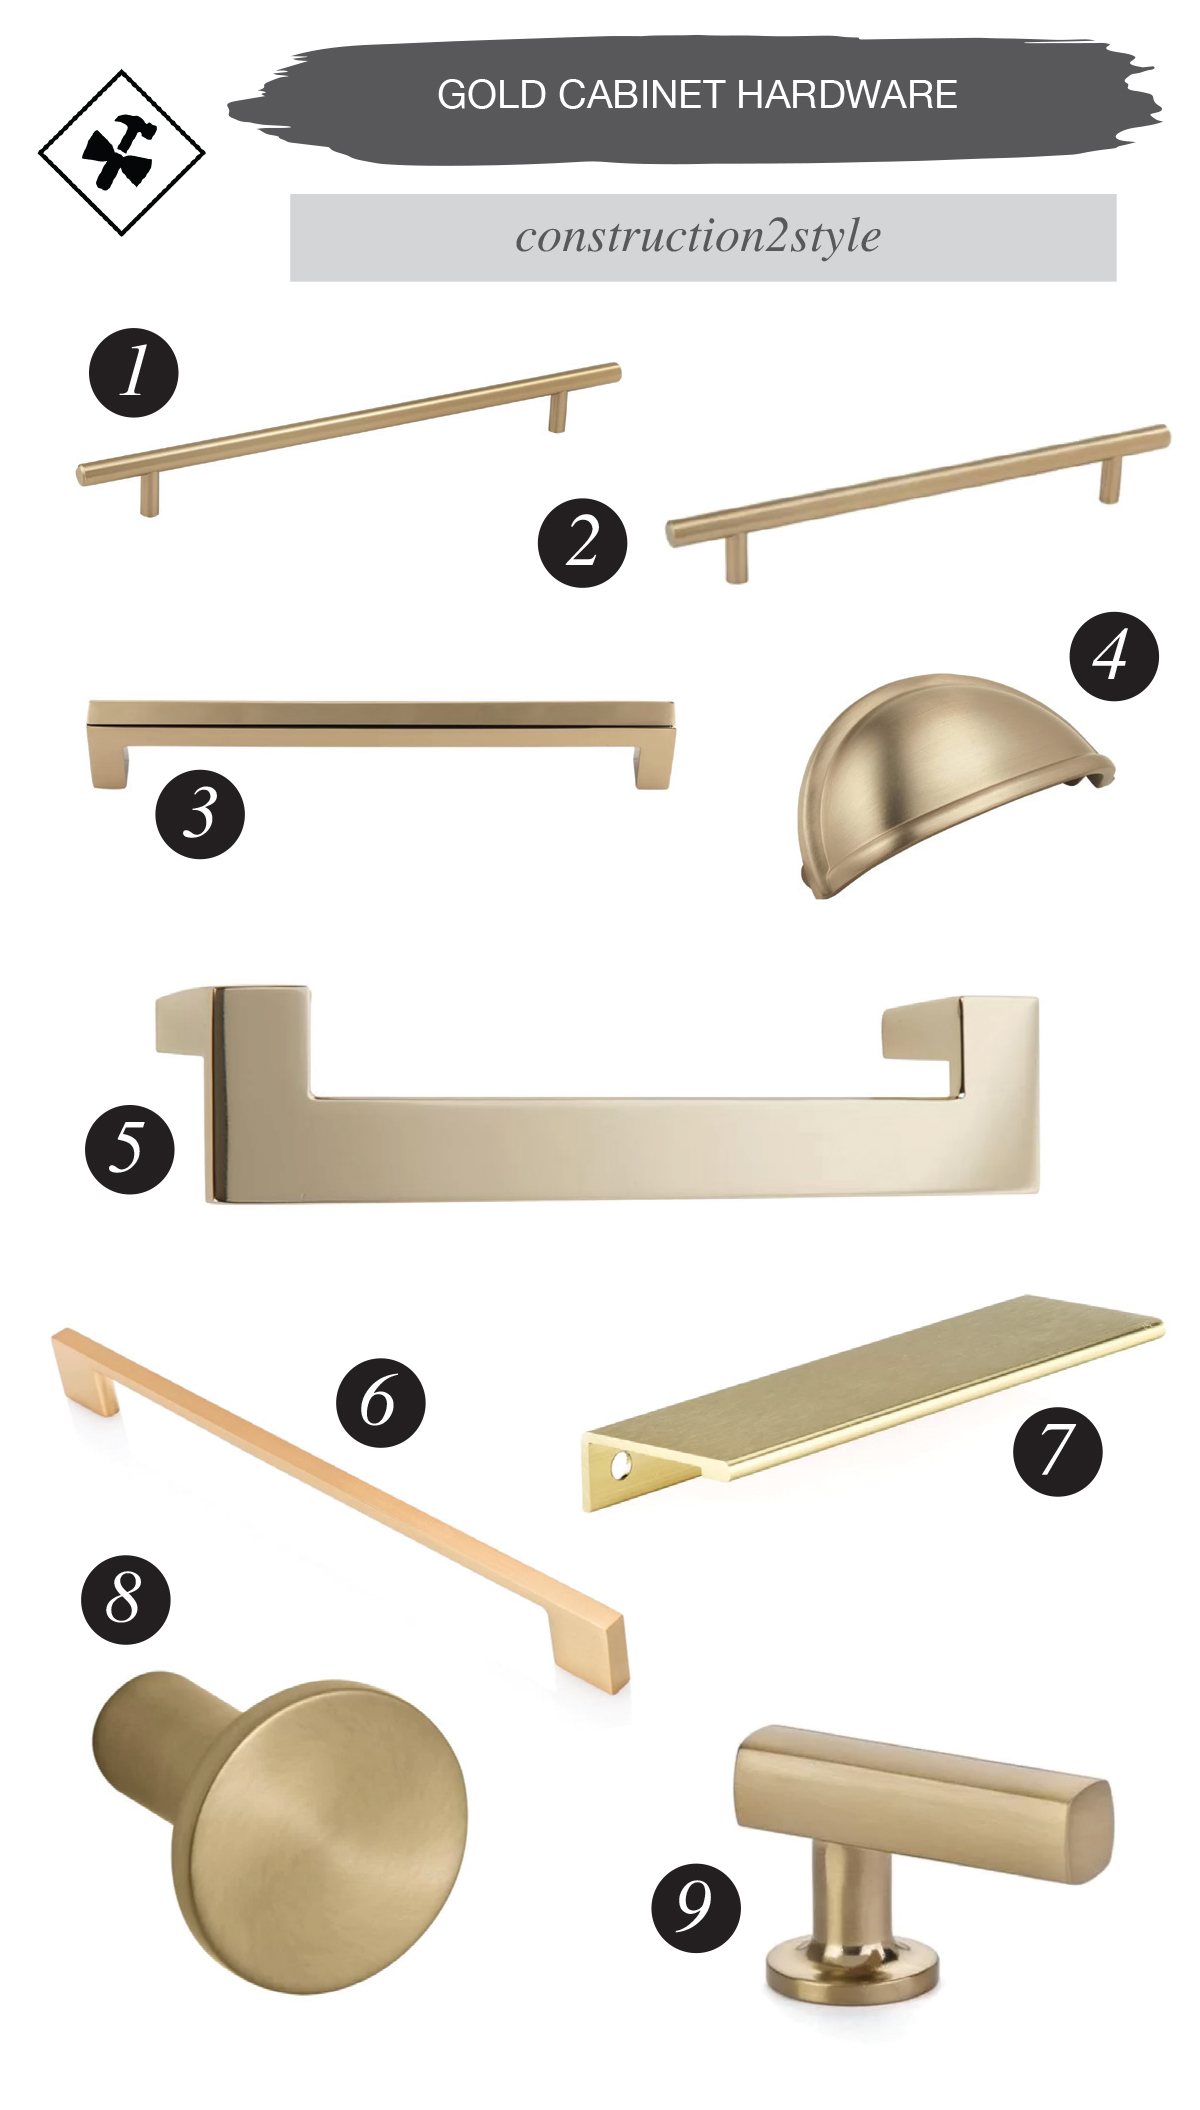 gold cabinet hardware | construction2style